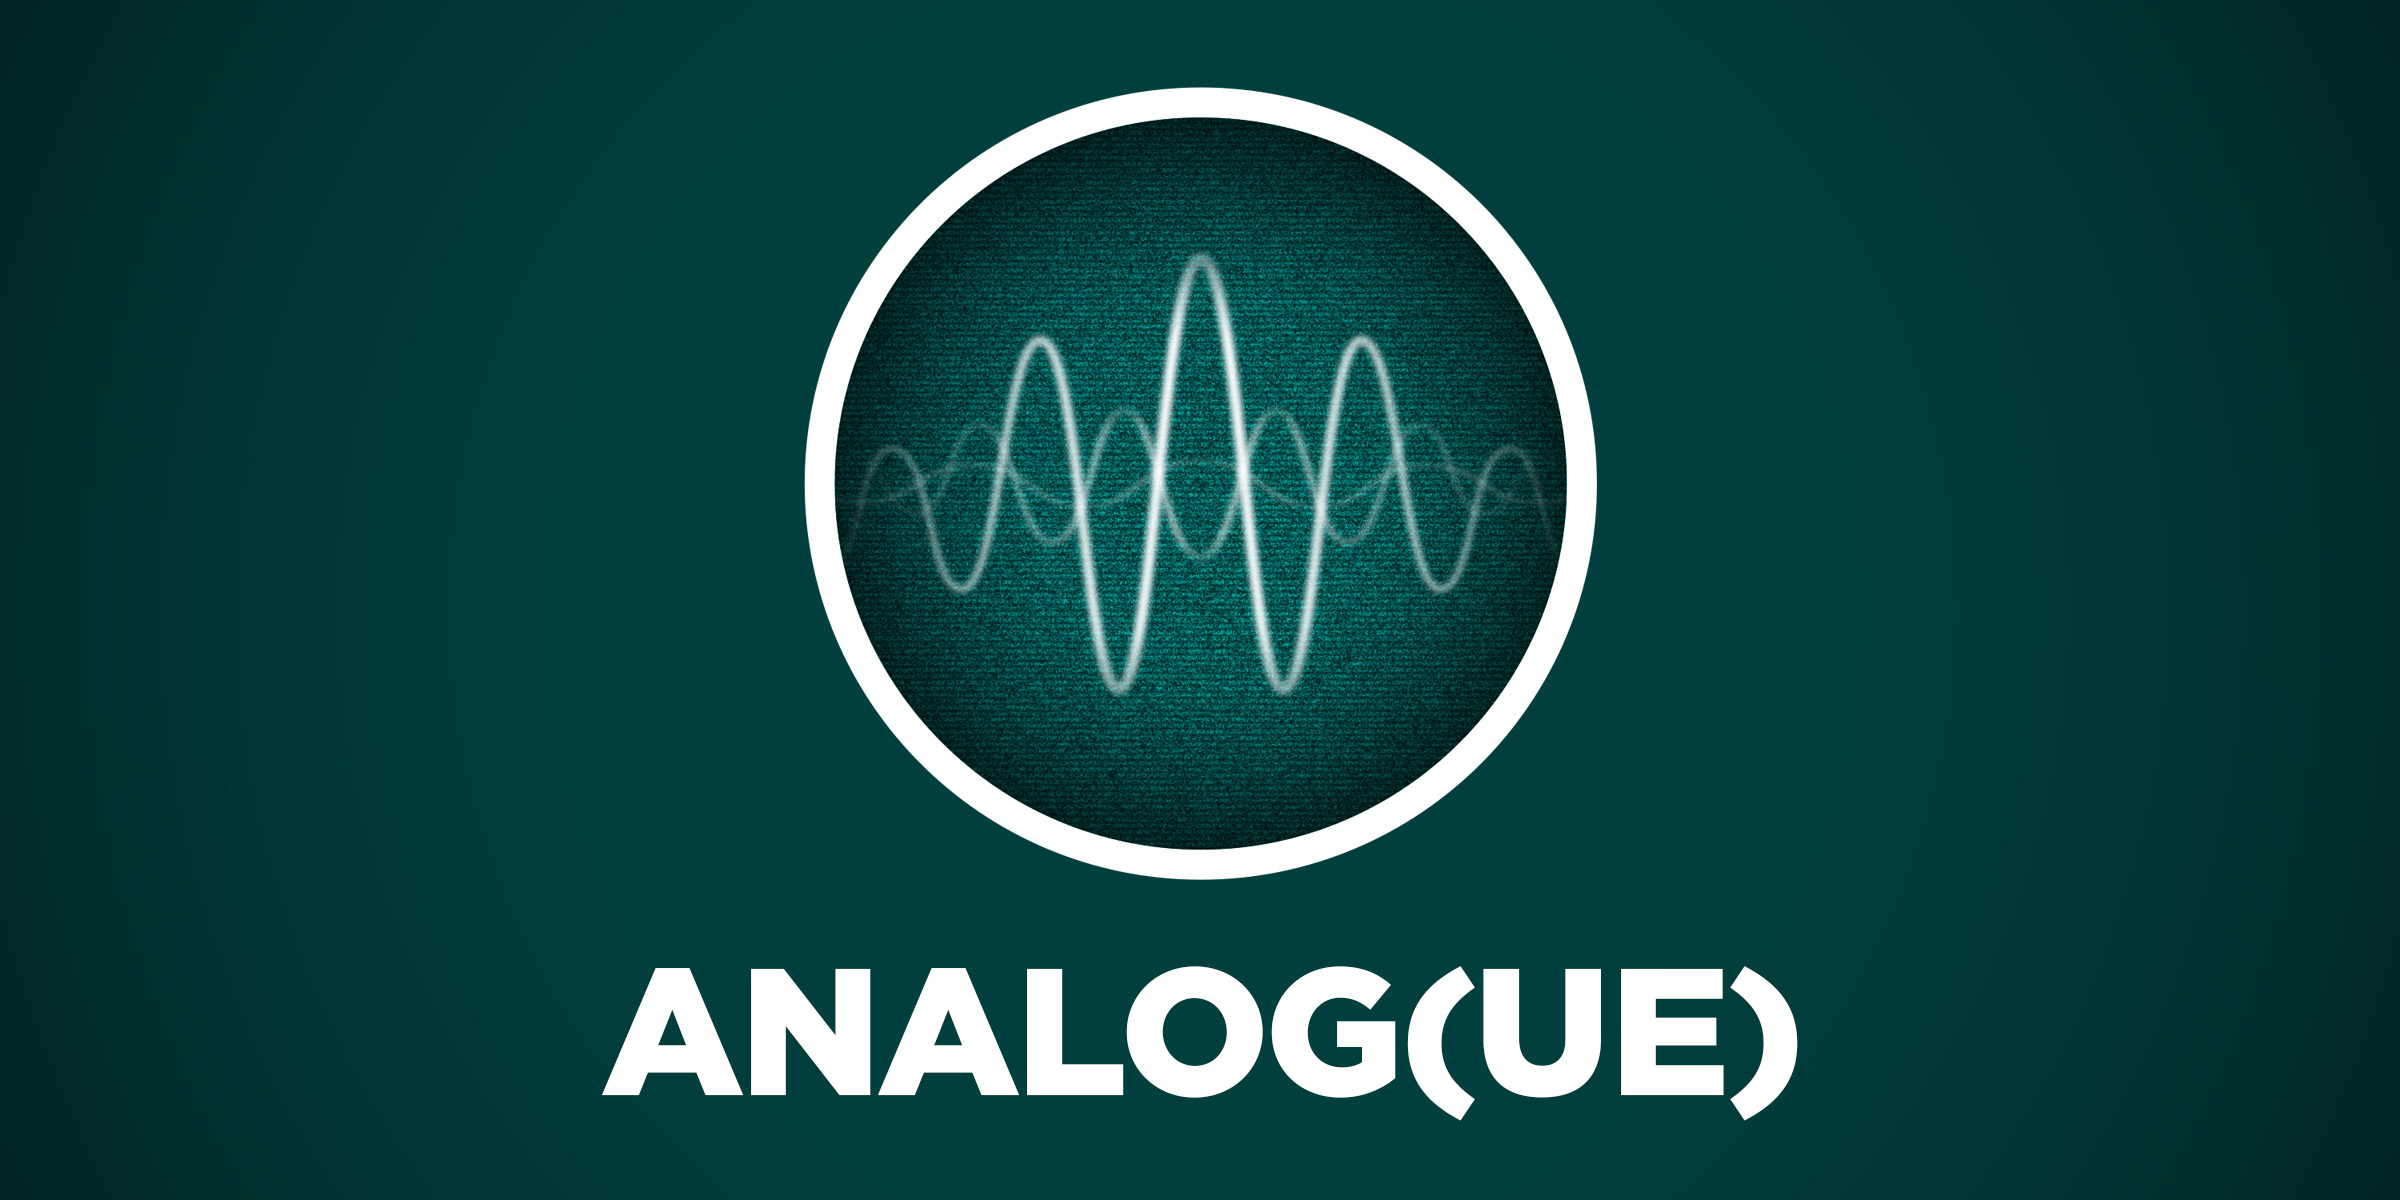 Analog(ue) #192: Hello, Welcome to 3 Months Ago